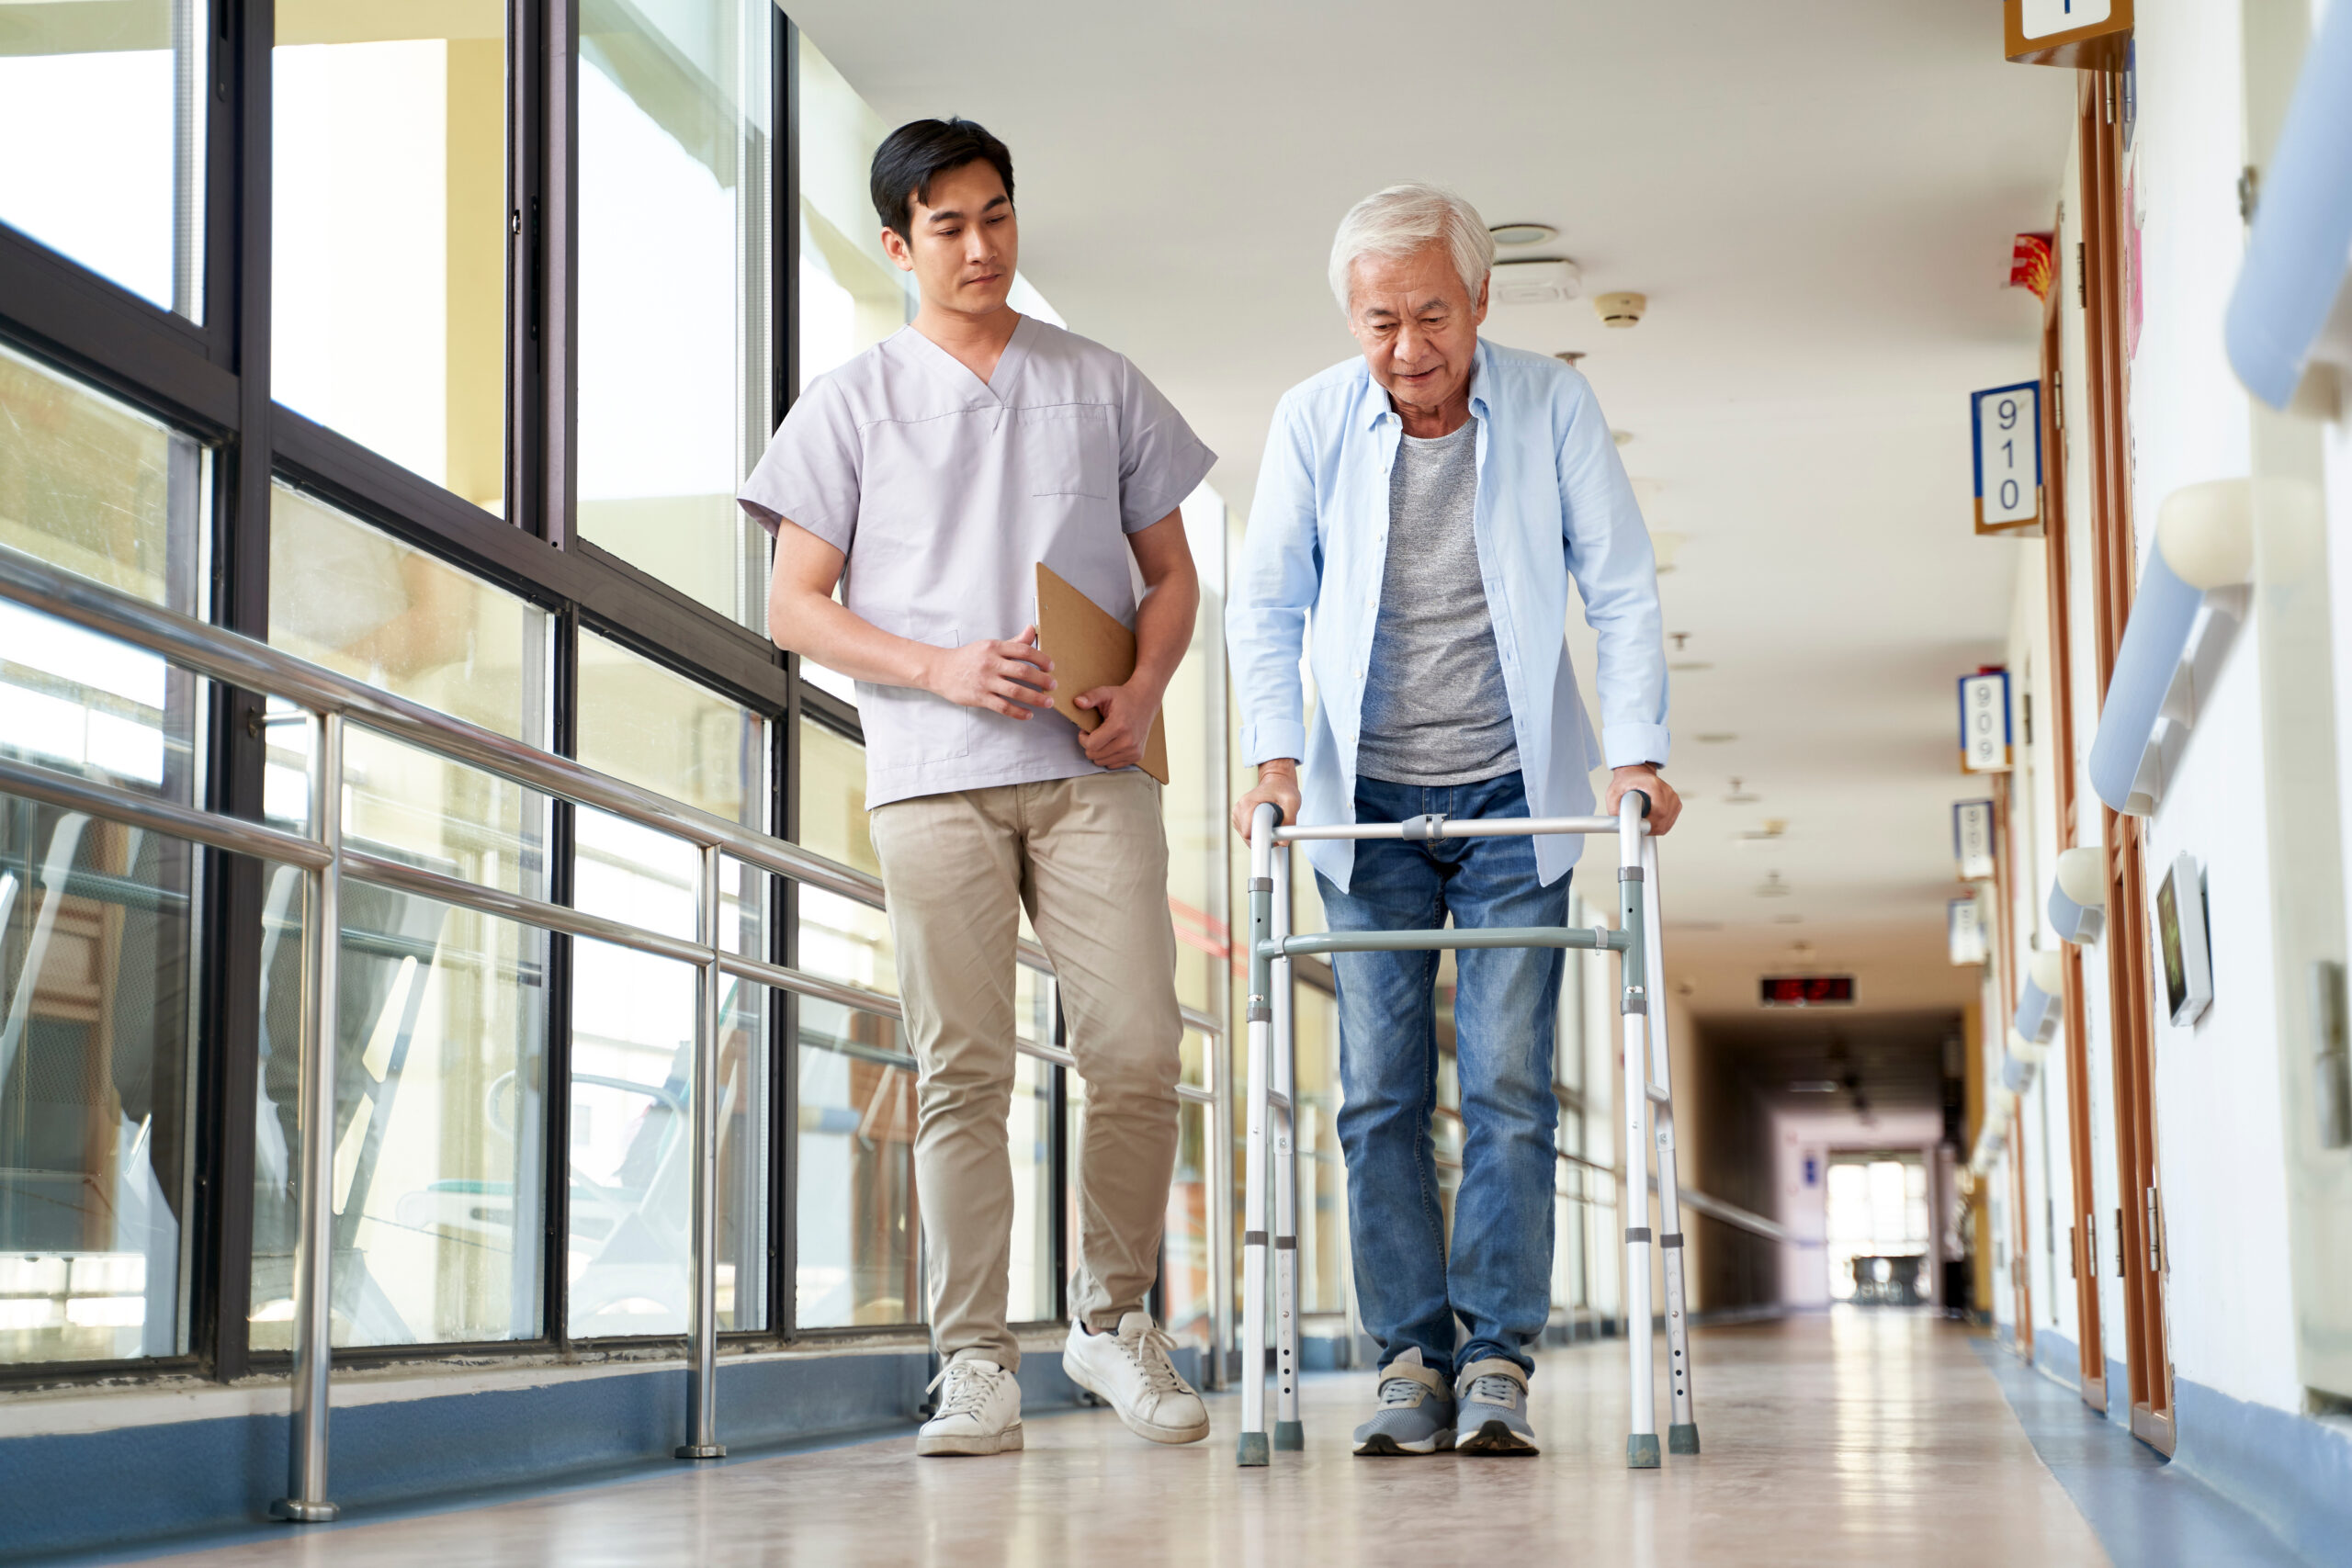 assisted living flooring